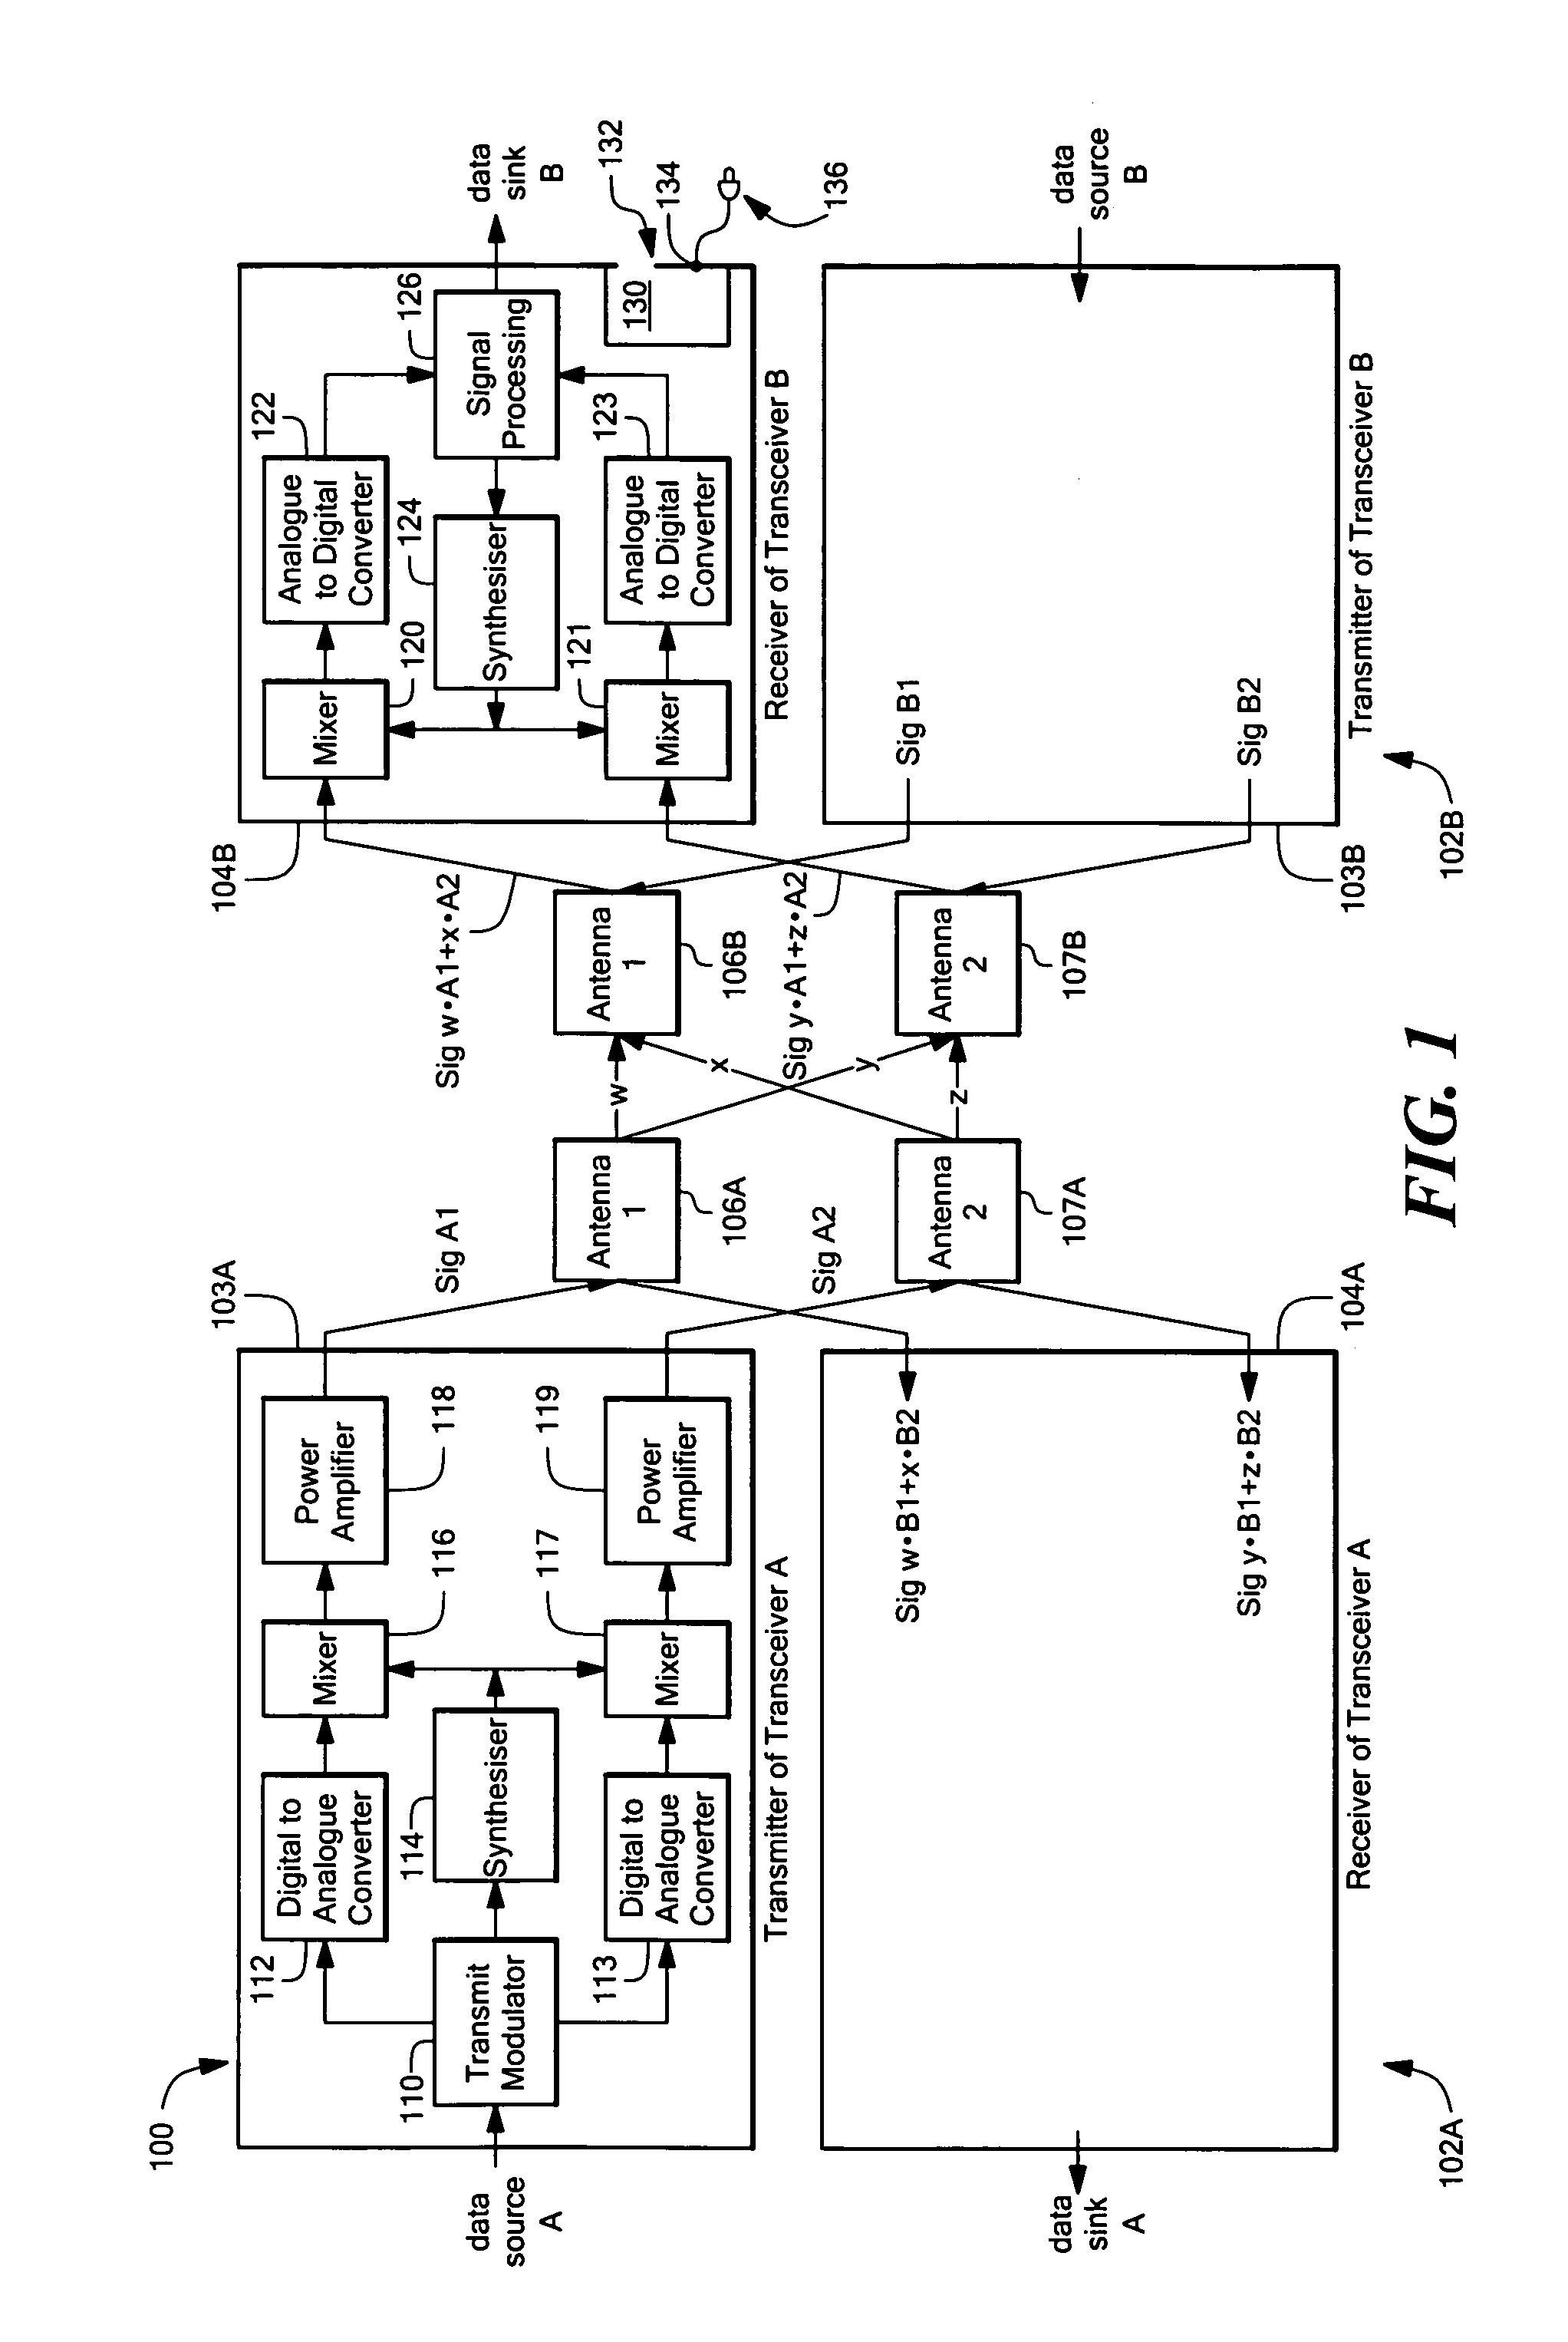 Multiple input multiple output (MIMO) wireless communications system